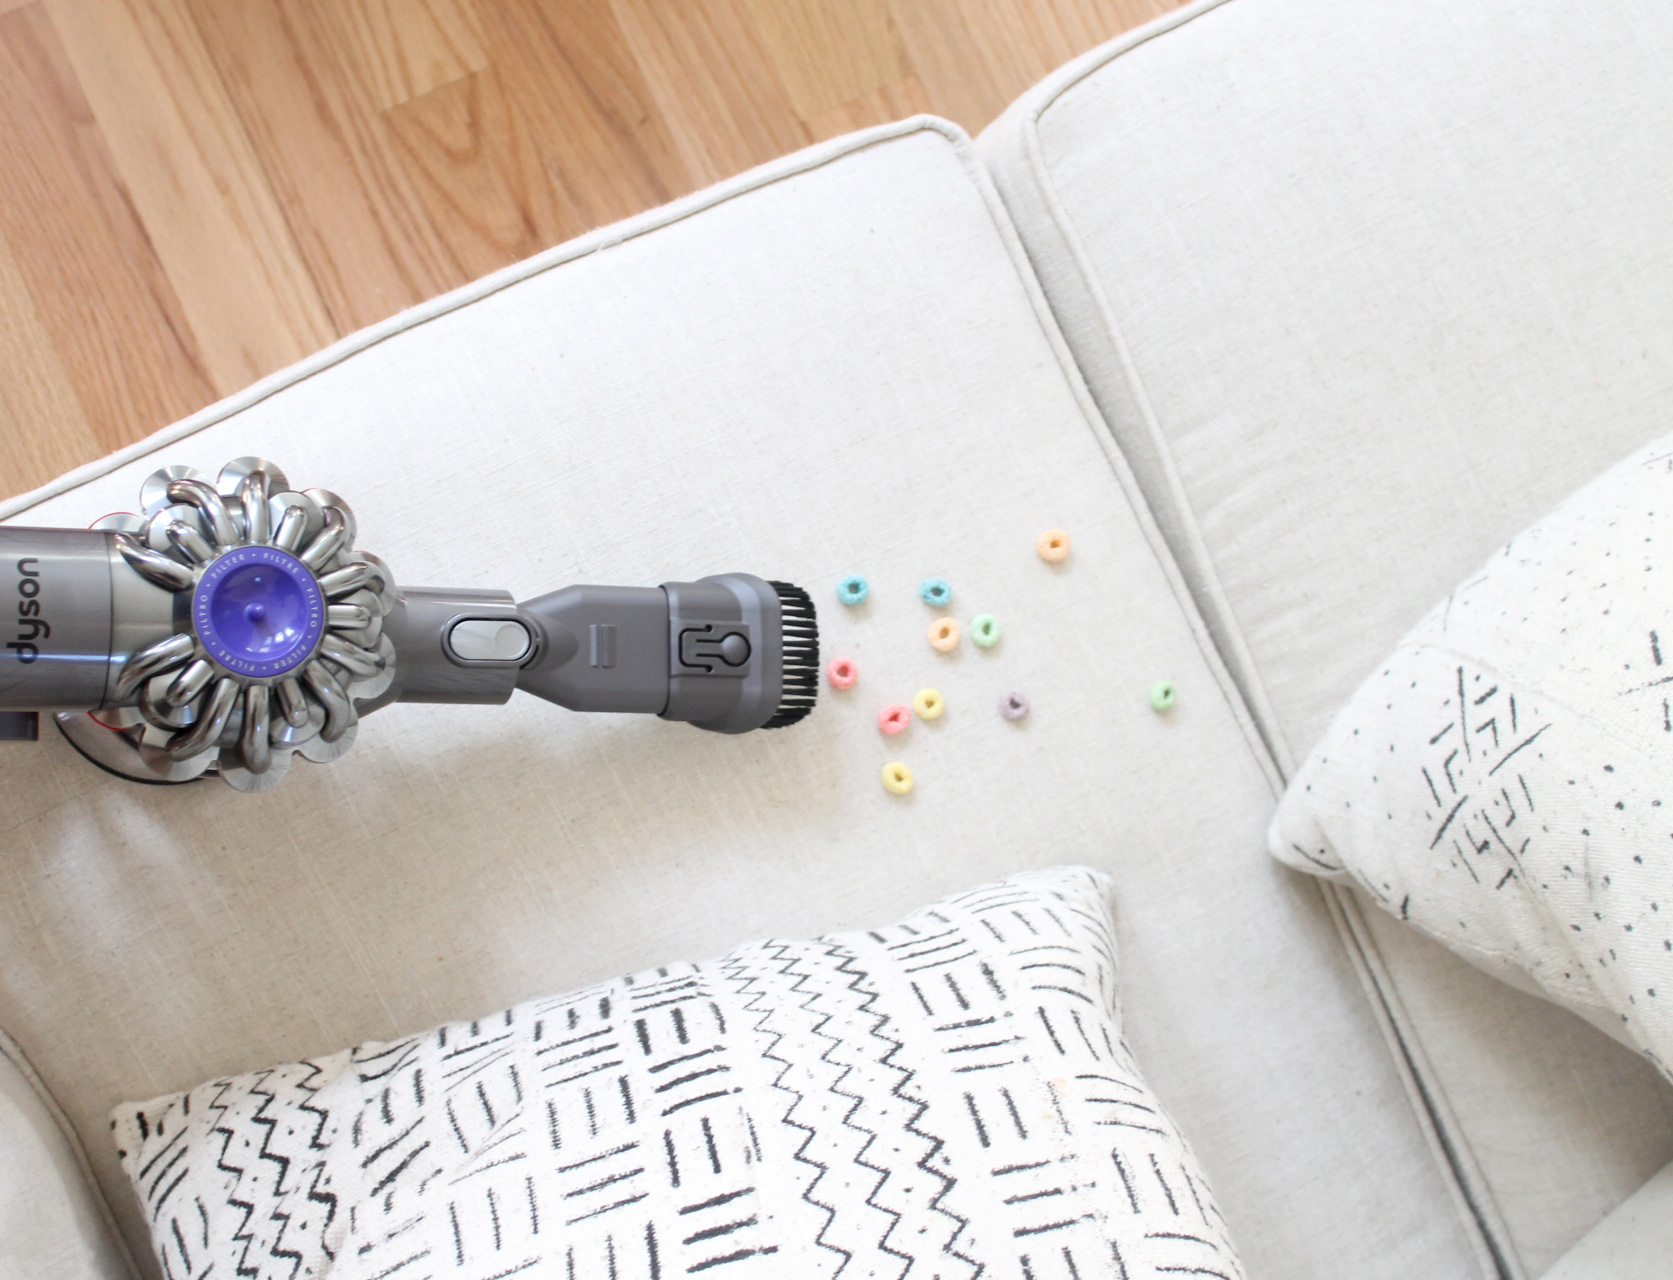 Parenting Must-Have: Dyson V6 Absolute Cord-Free Vacuum